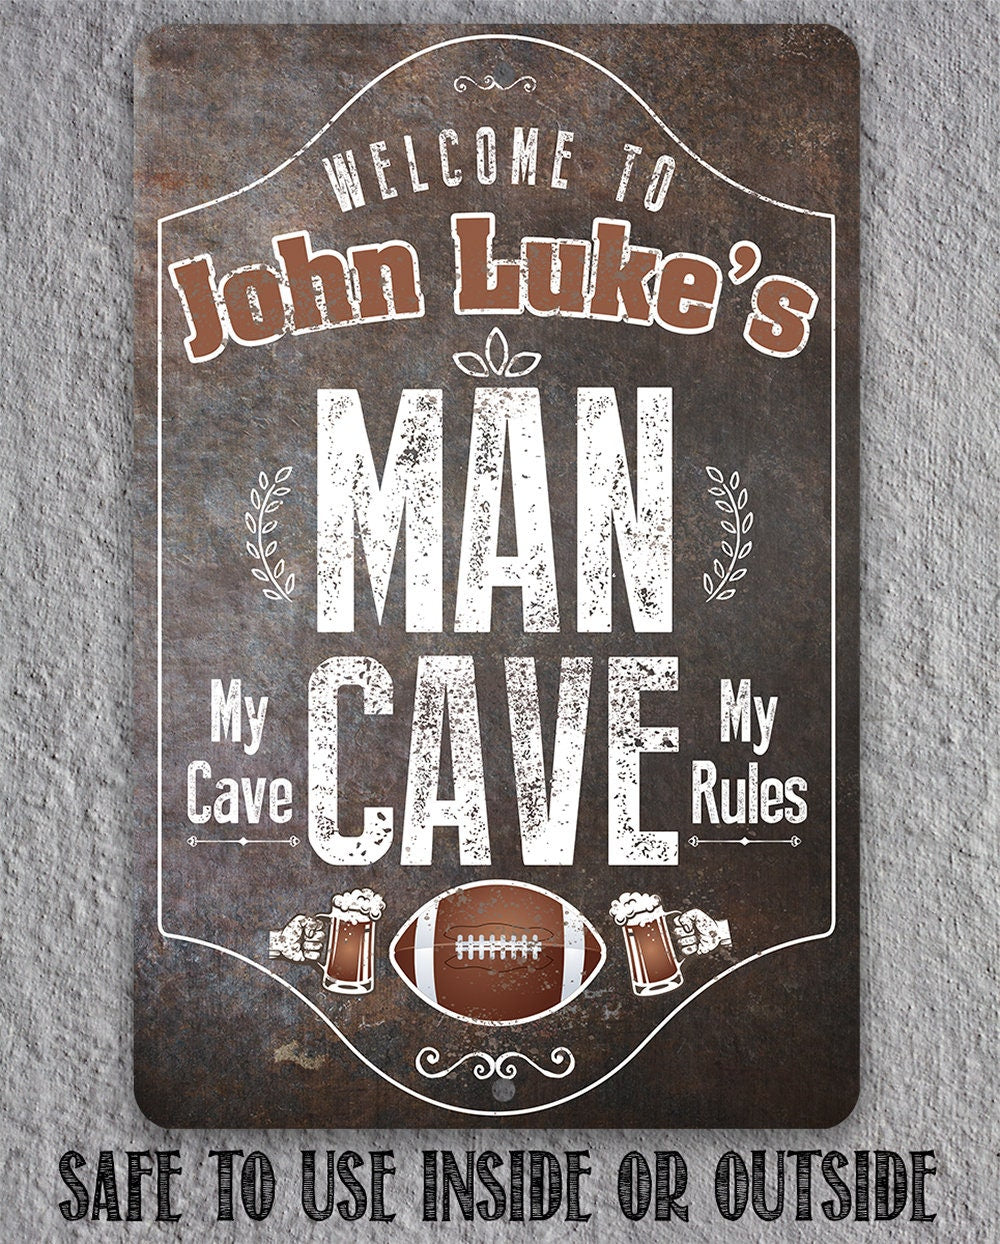 Personalized - Man Cave, My Cave, My Rules - Metal Sign Metal Sign Lone Star Art 